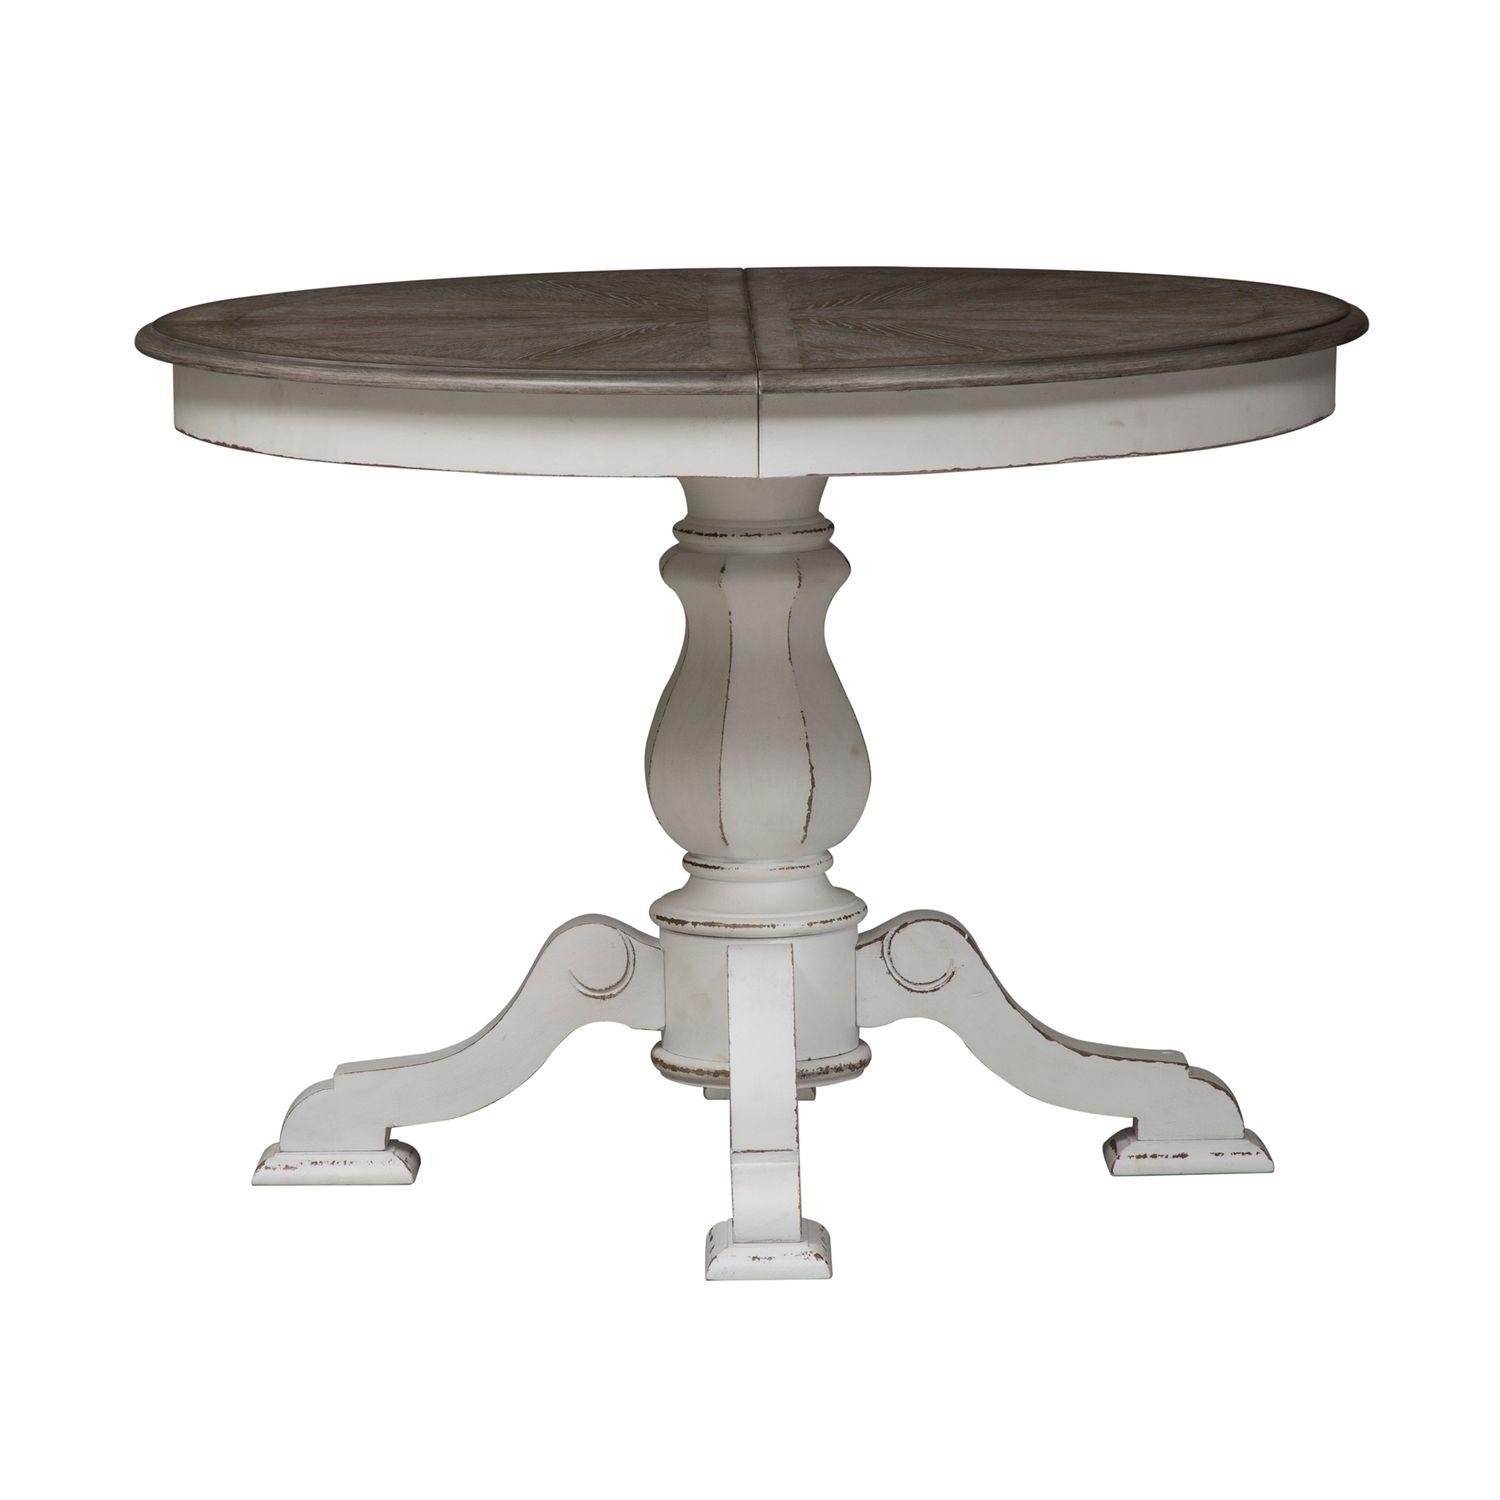 European Traditional Dining Table Magnolia Manor  (244-DR) Dining Table 244-DR-PED in White 